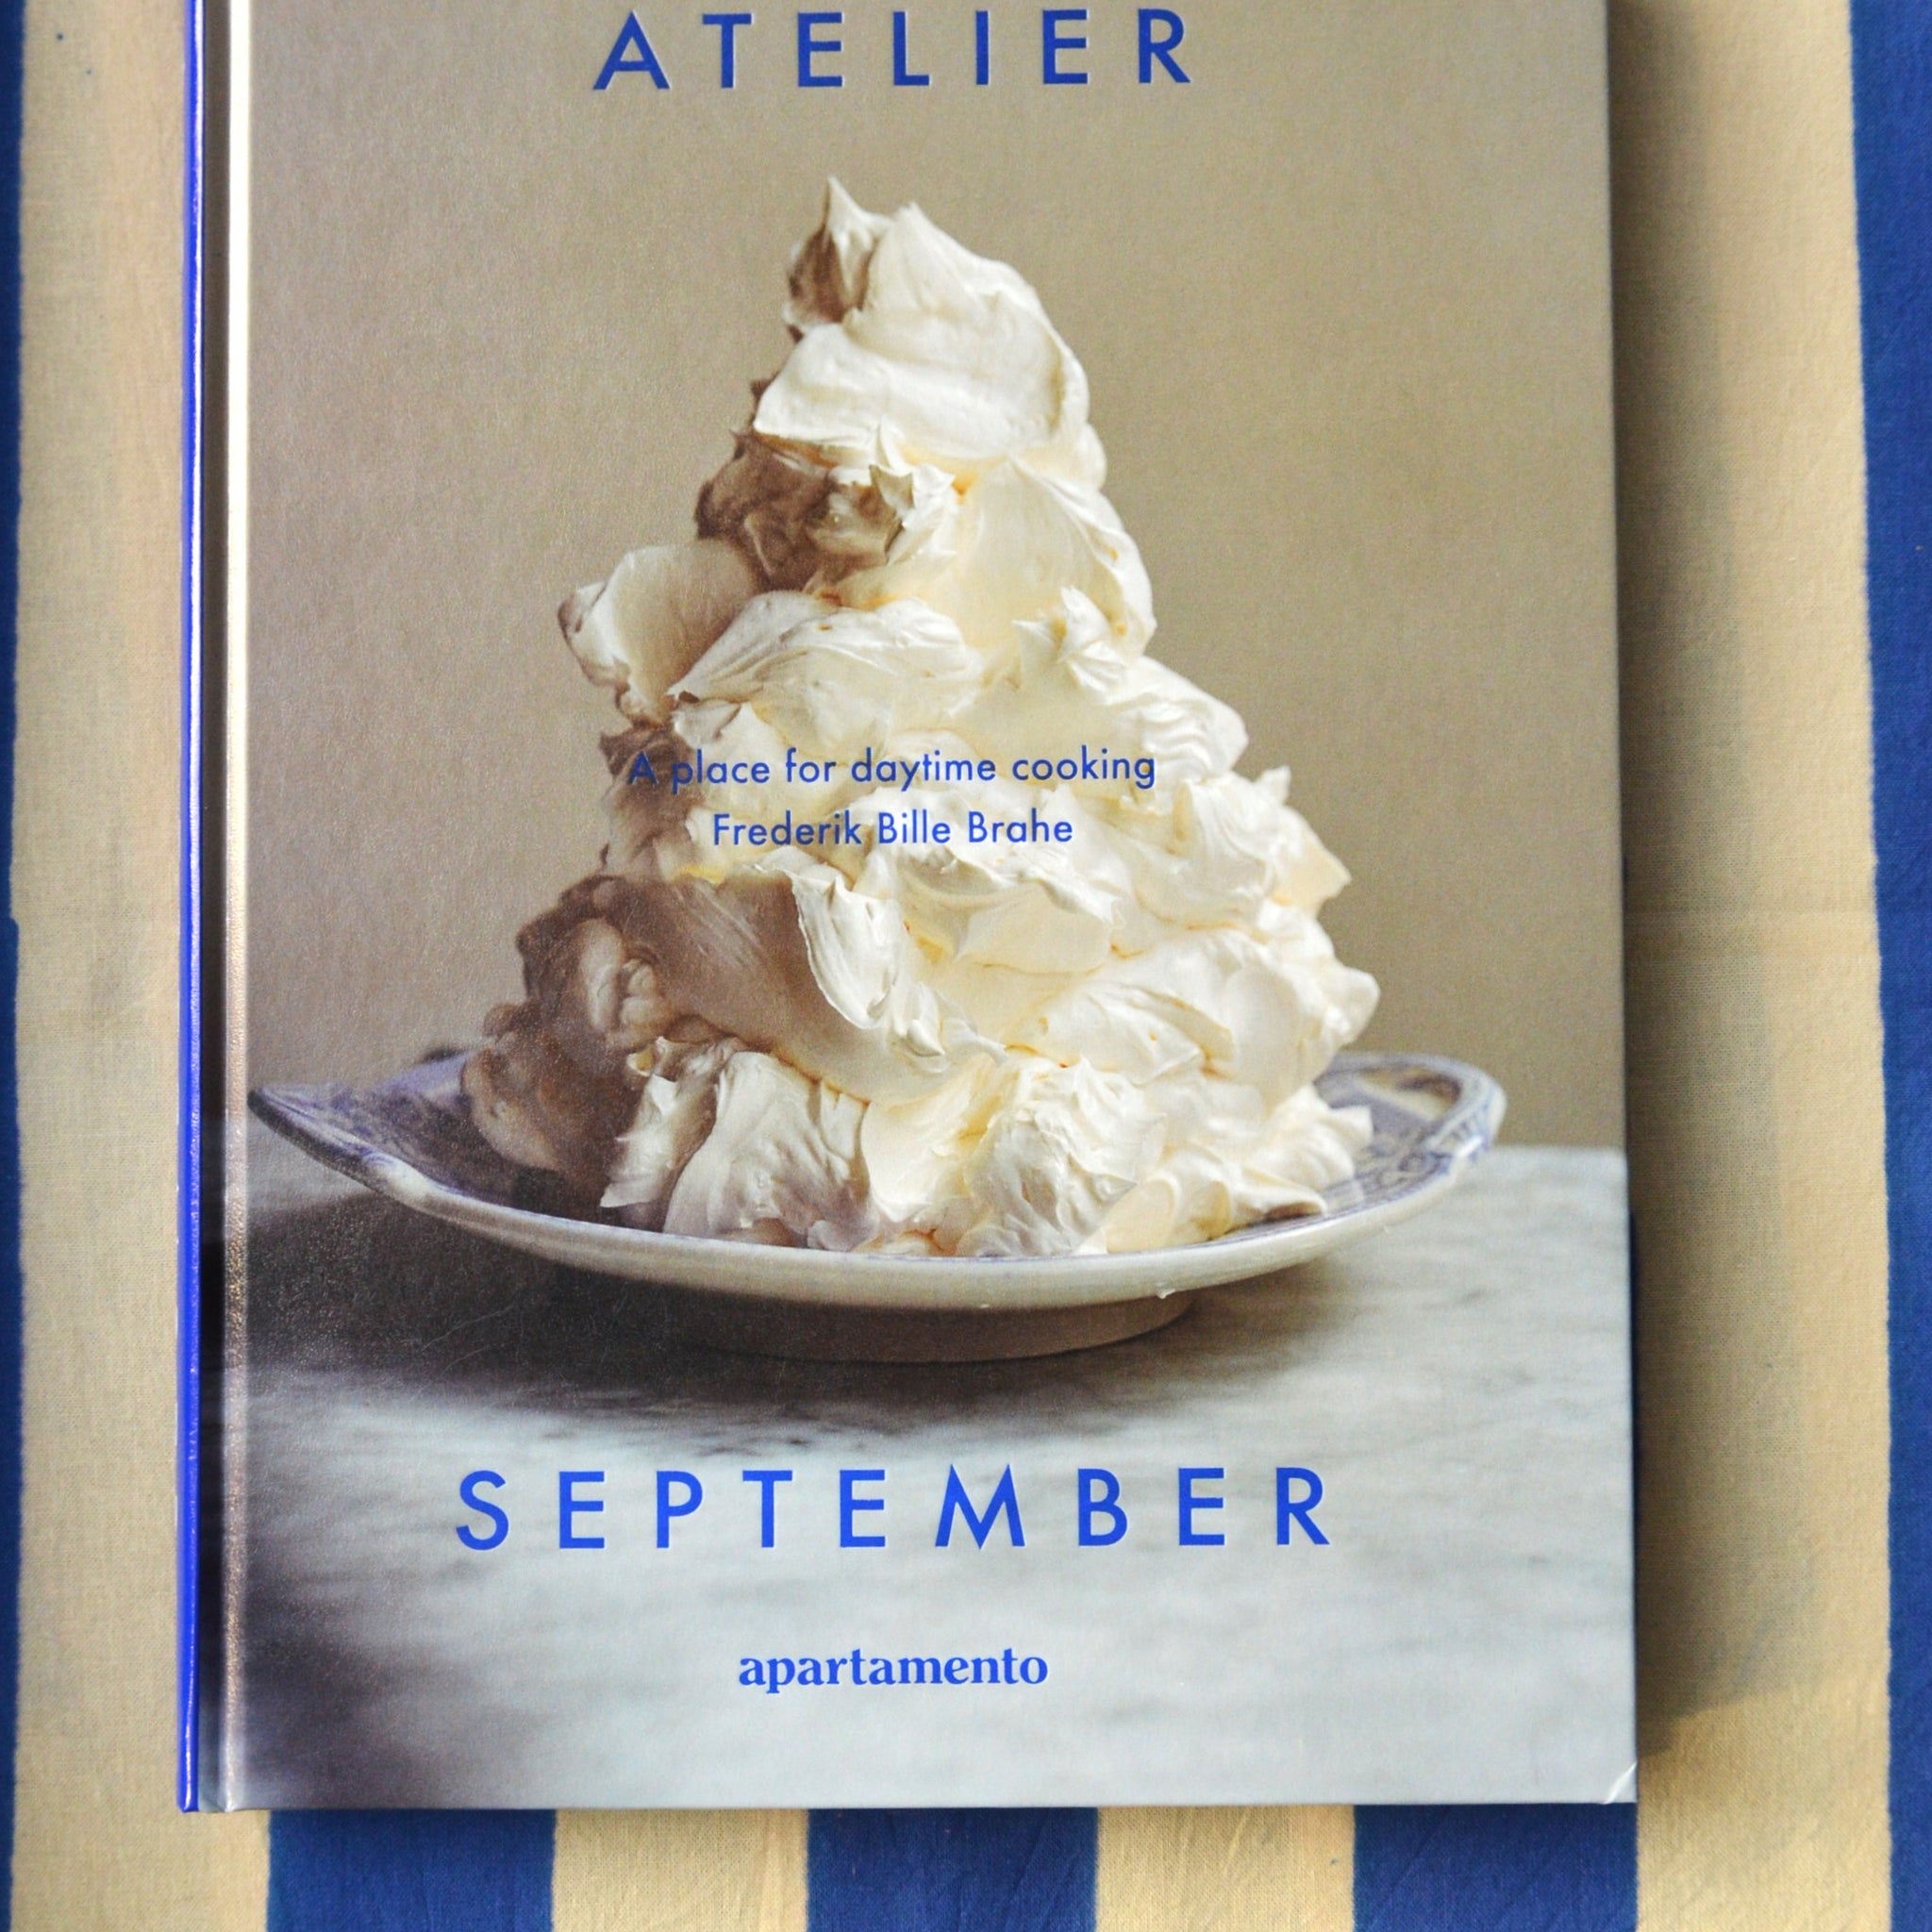 Atelier September - A place for daytime cooking - Apartamento